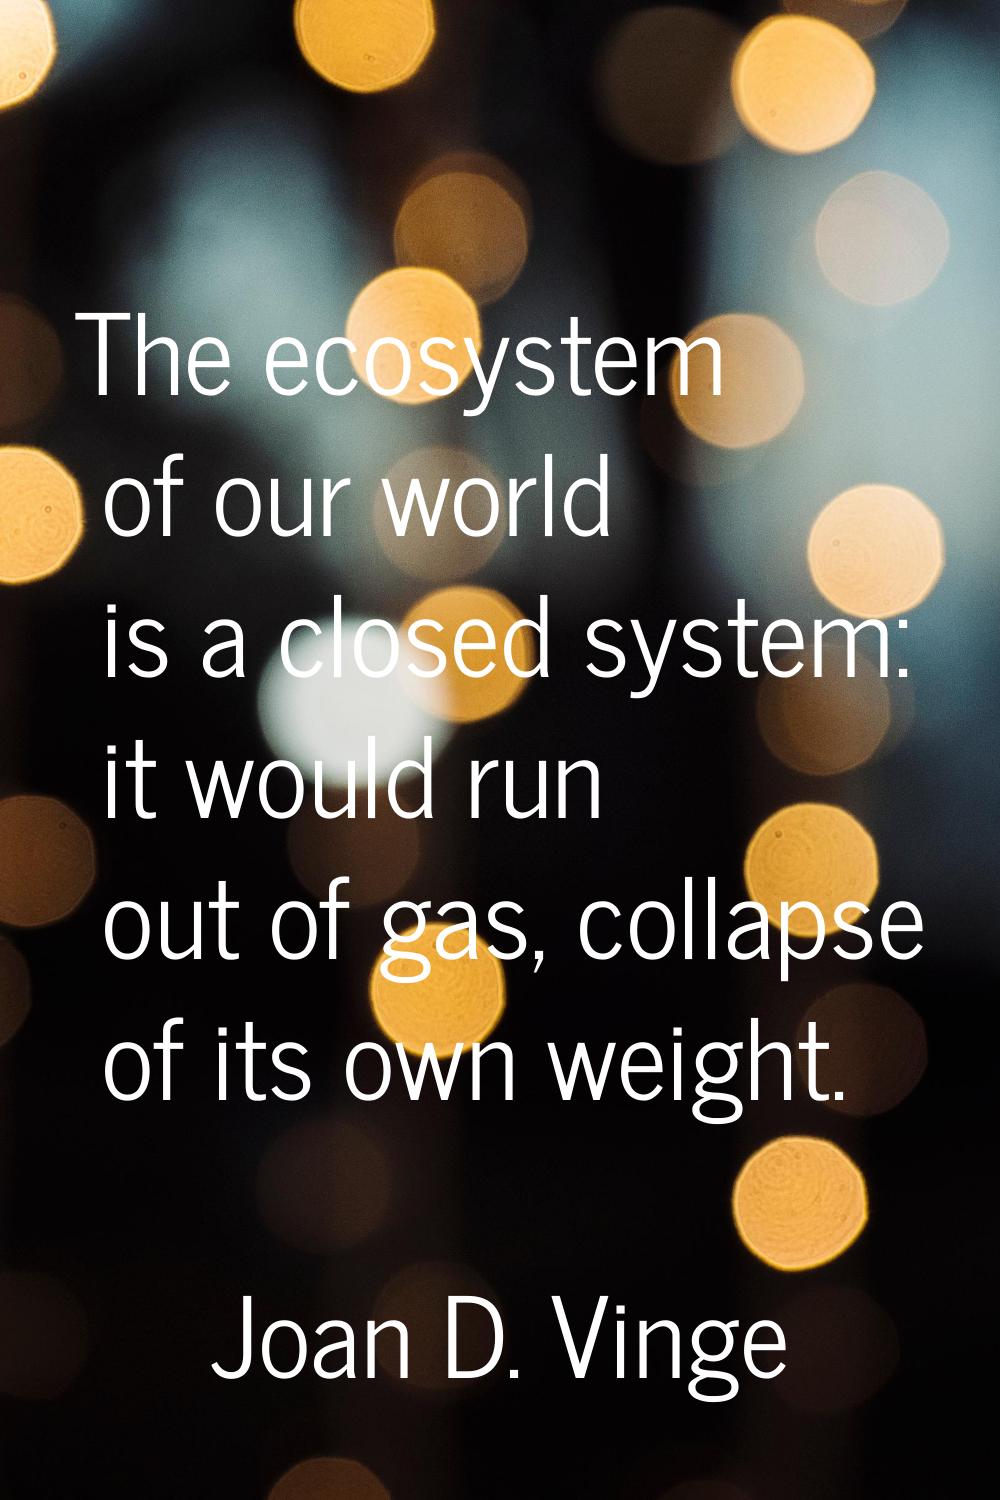 The ecosystem of our world is a closed system: it would run out of gas, collapse of its own weight.